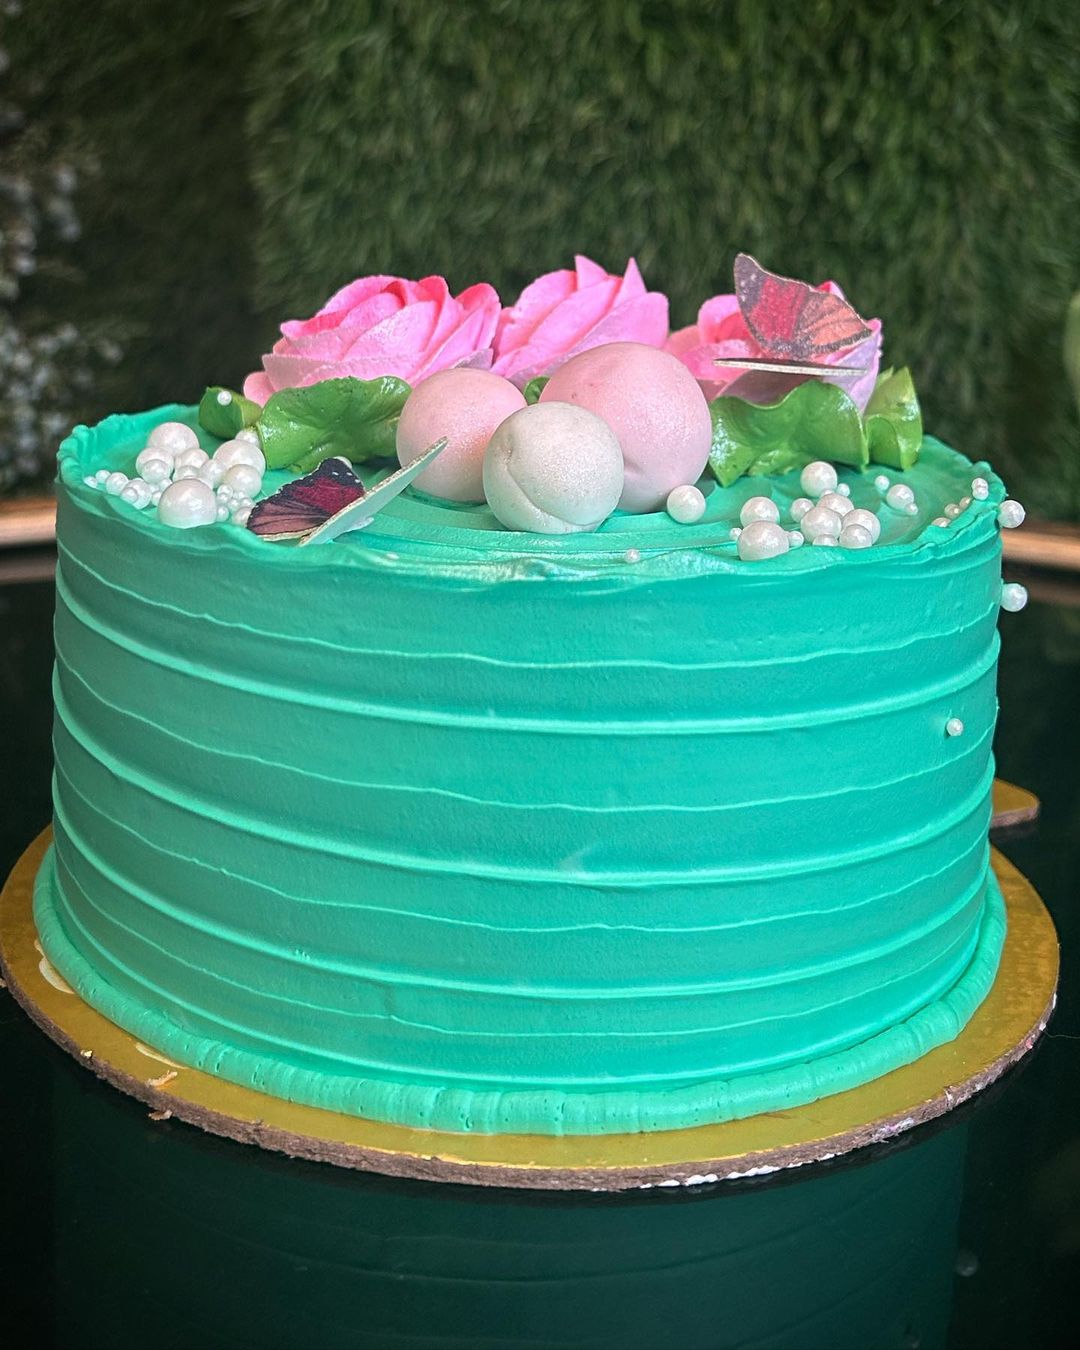 Tropical Delight Cake